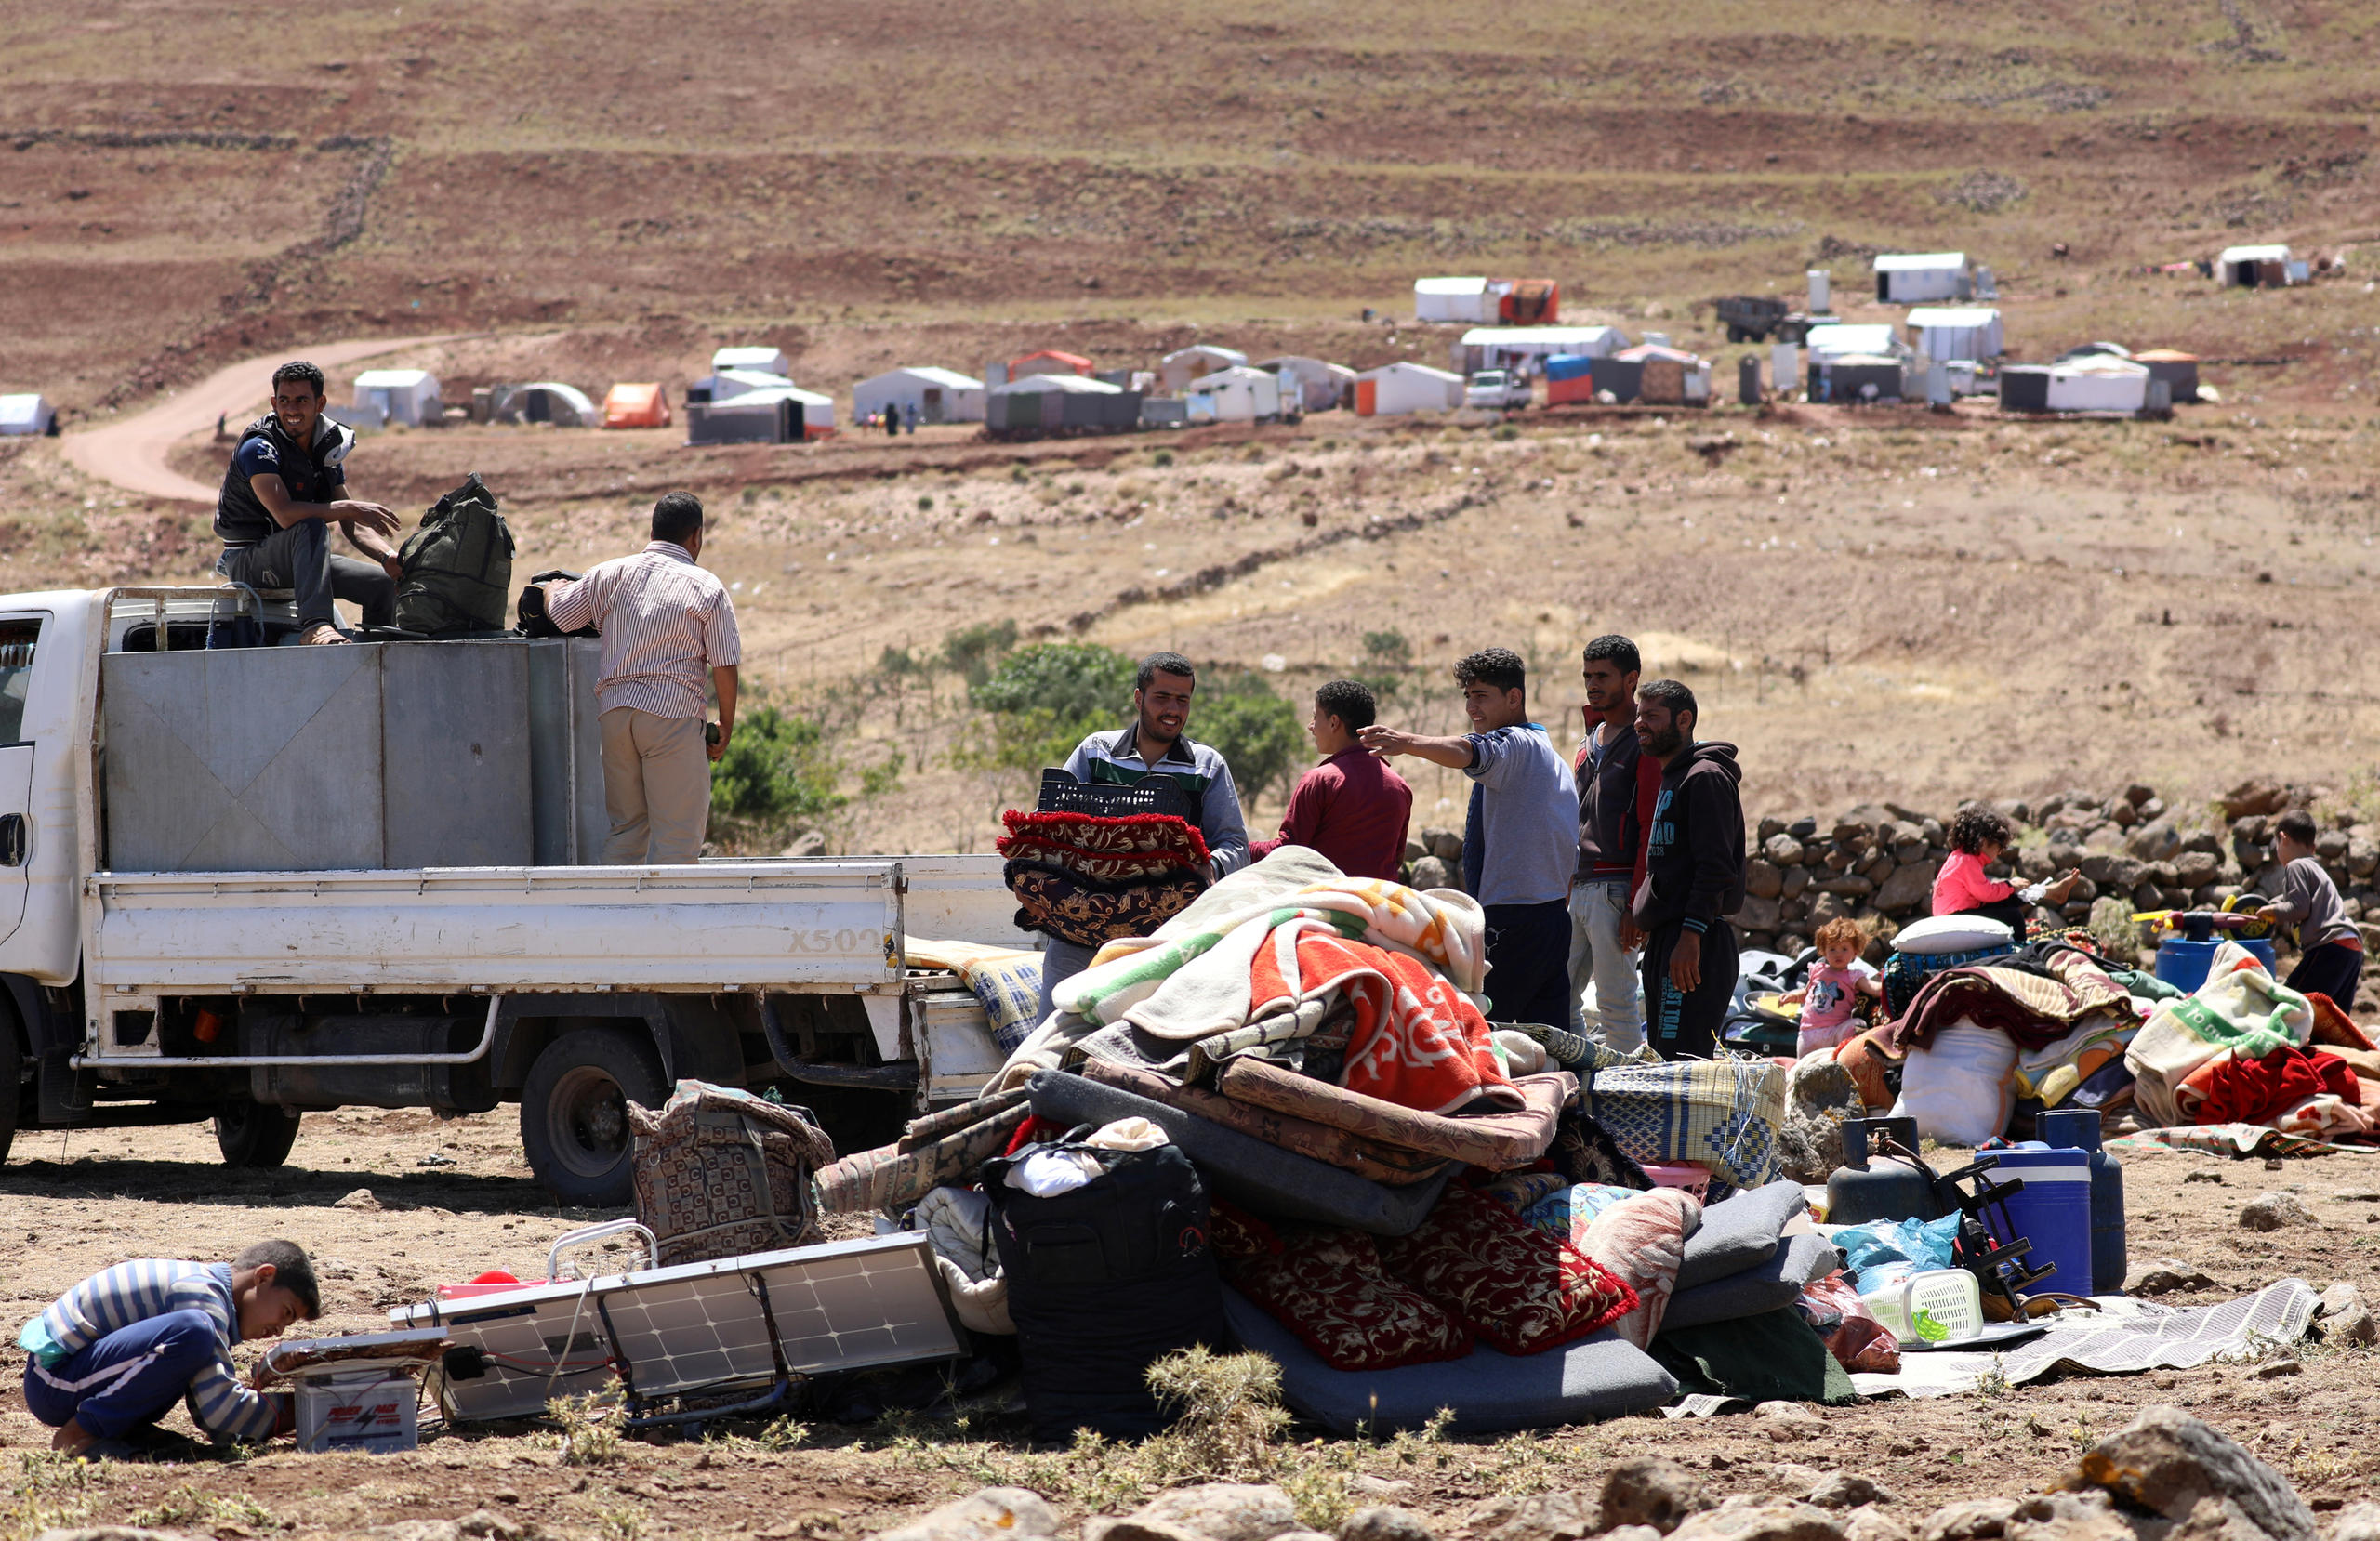 Syrian displaced people near the Israeli-occupied Golan Heights, in Quneitra, Syria, on June 21, 2018